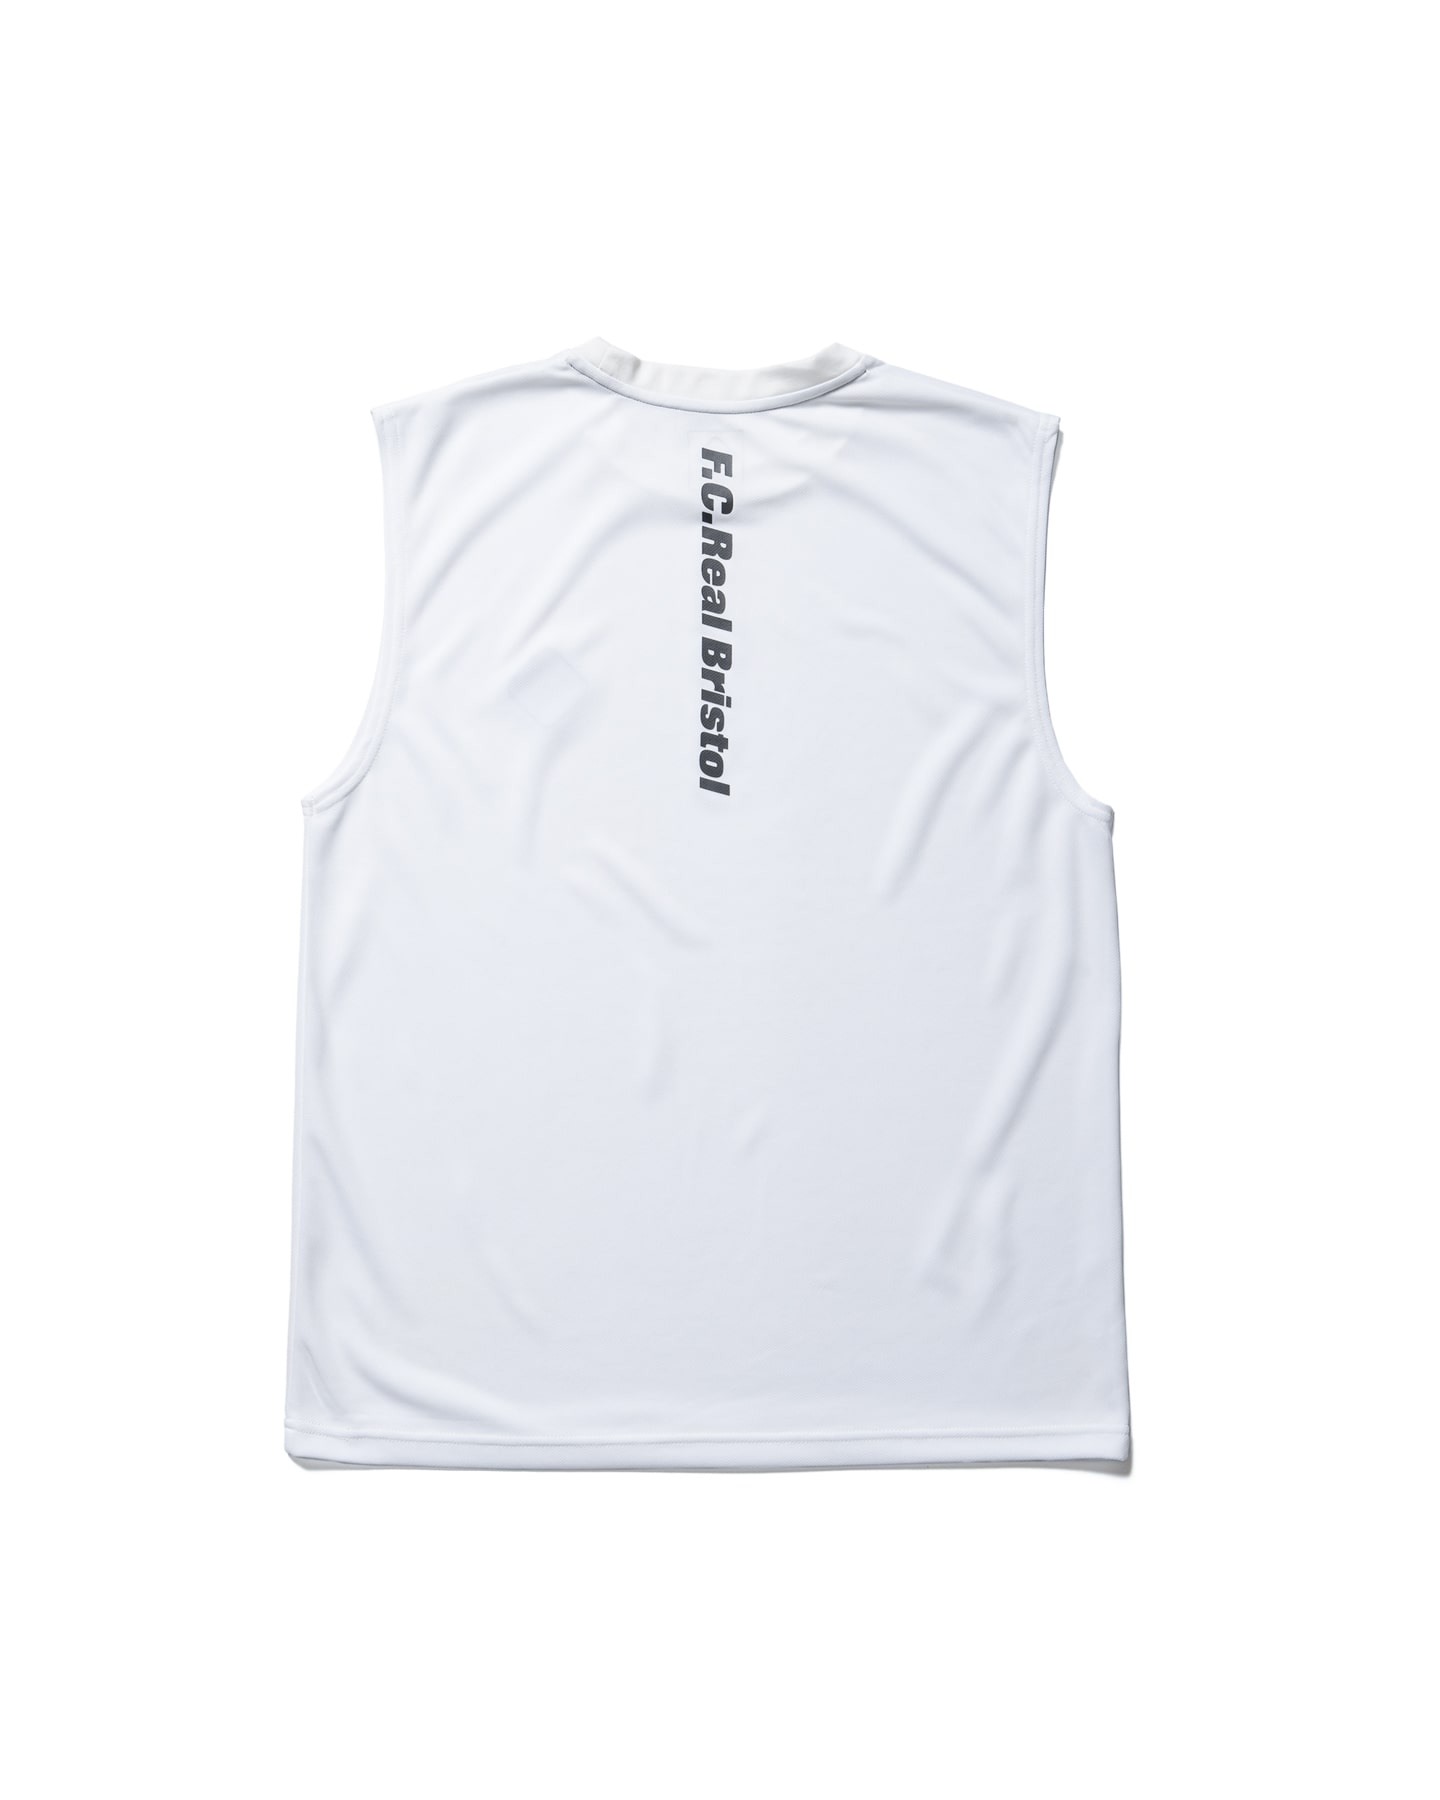 SOPH. | NO SLEEVE TRAINING TOP(L WHITE):